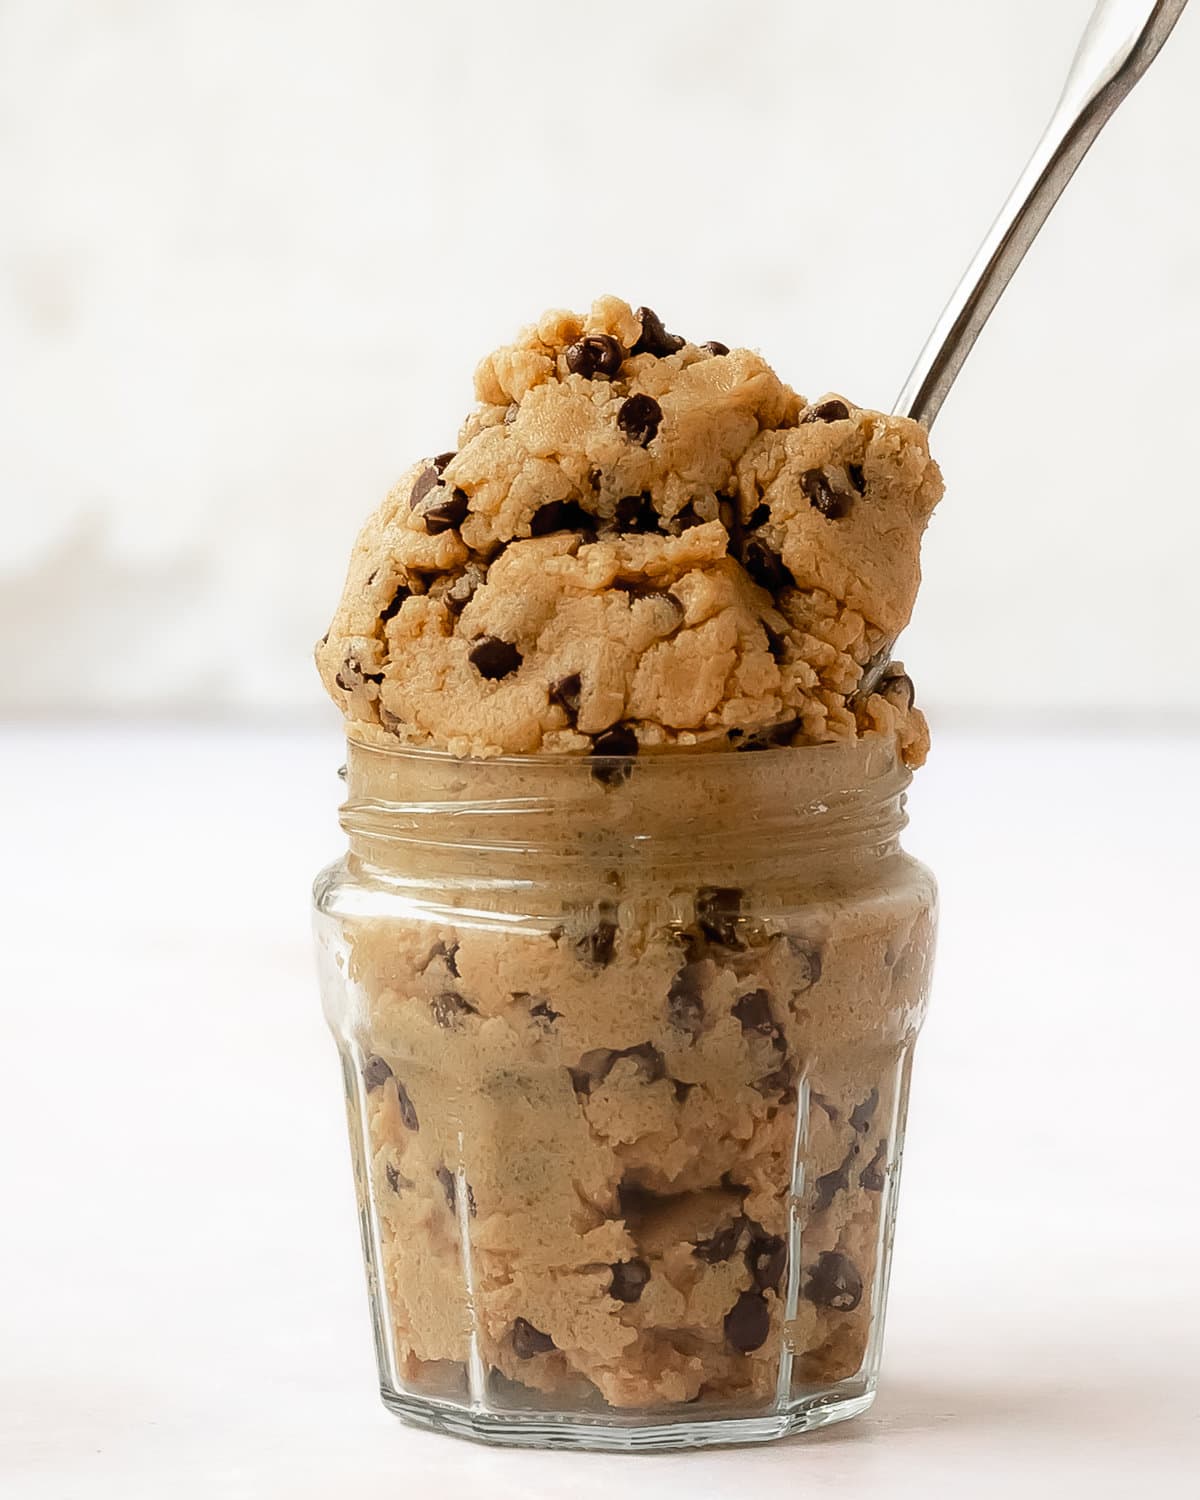 Vegan cookie dough is a quick and easy edible chocolate chip cookie dough. This vegan edible cookie dough is made with simple ingredient, is gluten and dairy free and can be made refined sugar free, too. If you’re a fan of eating scoops of cookie dough by the spoonful, this vegan chocolate chip cookie dough is for you!